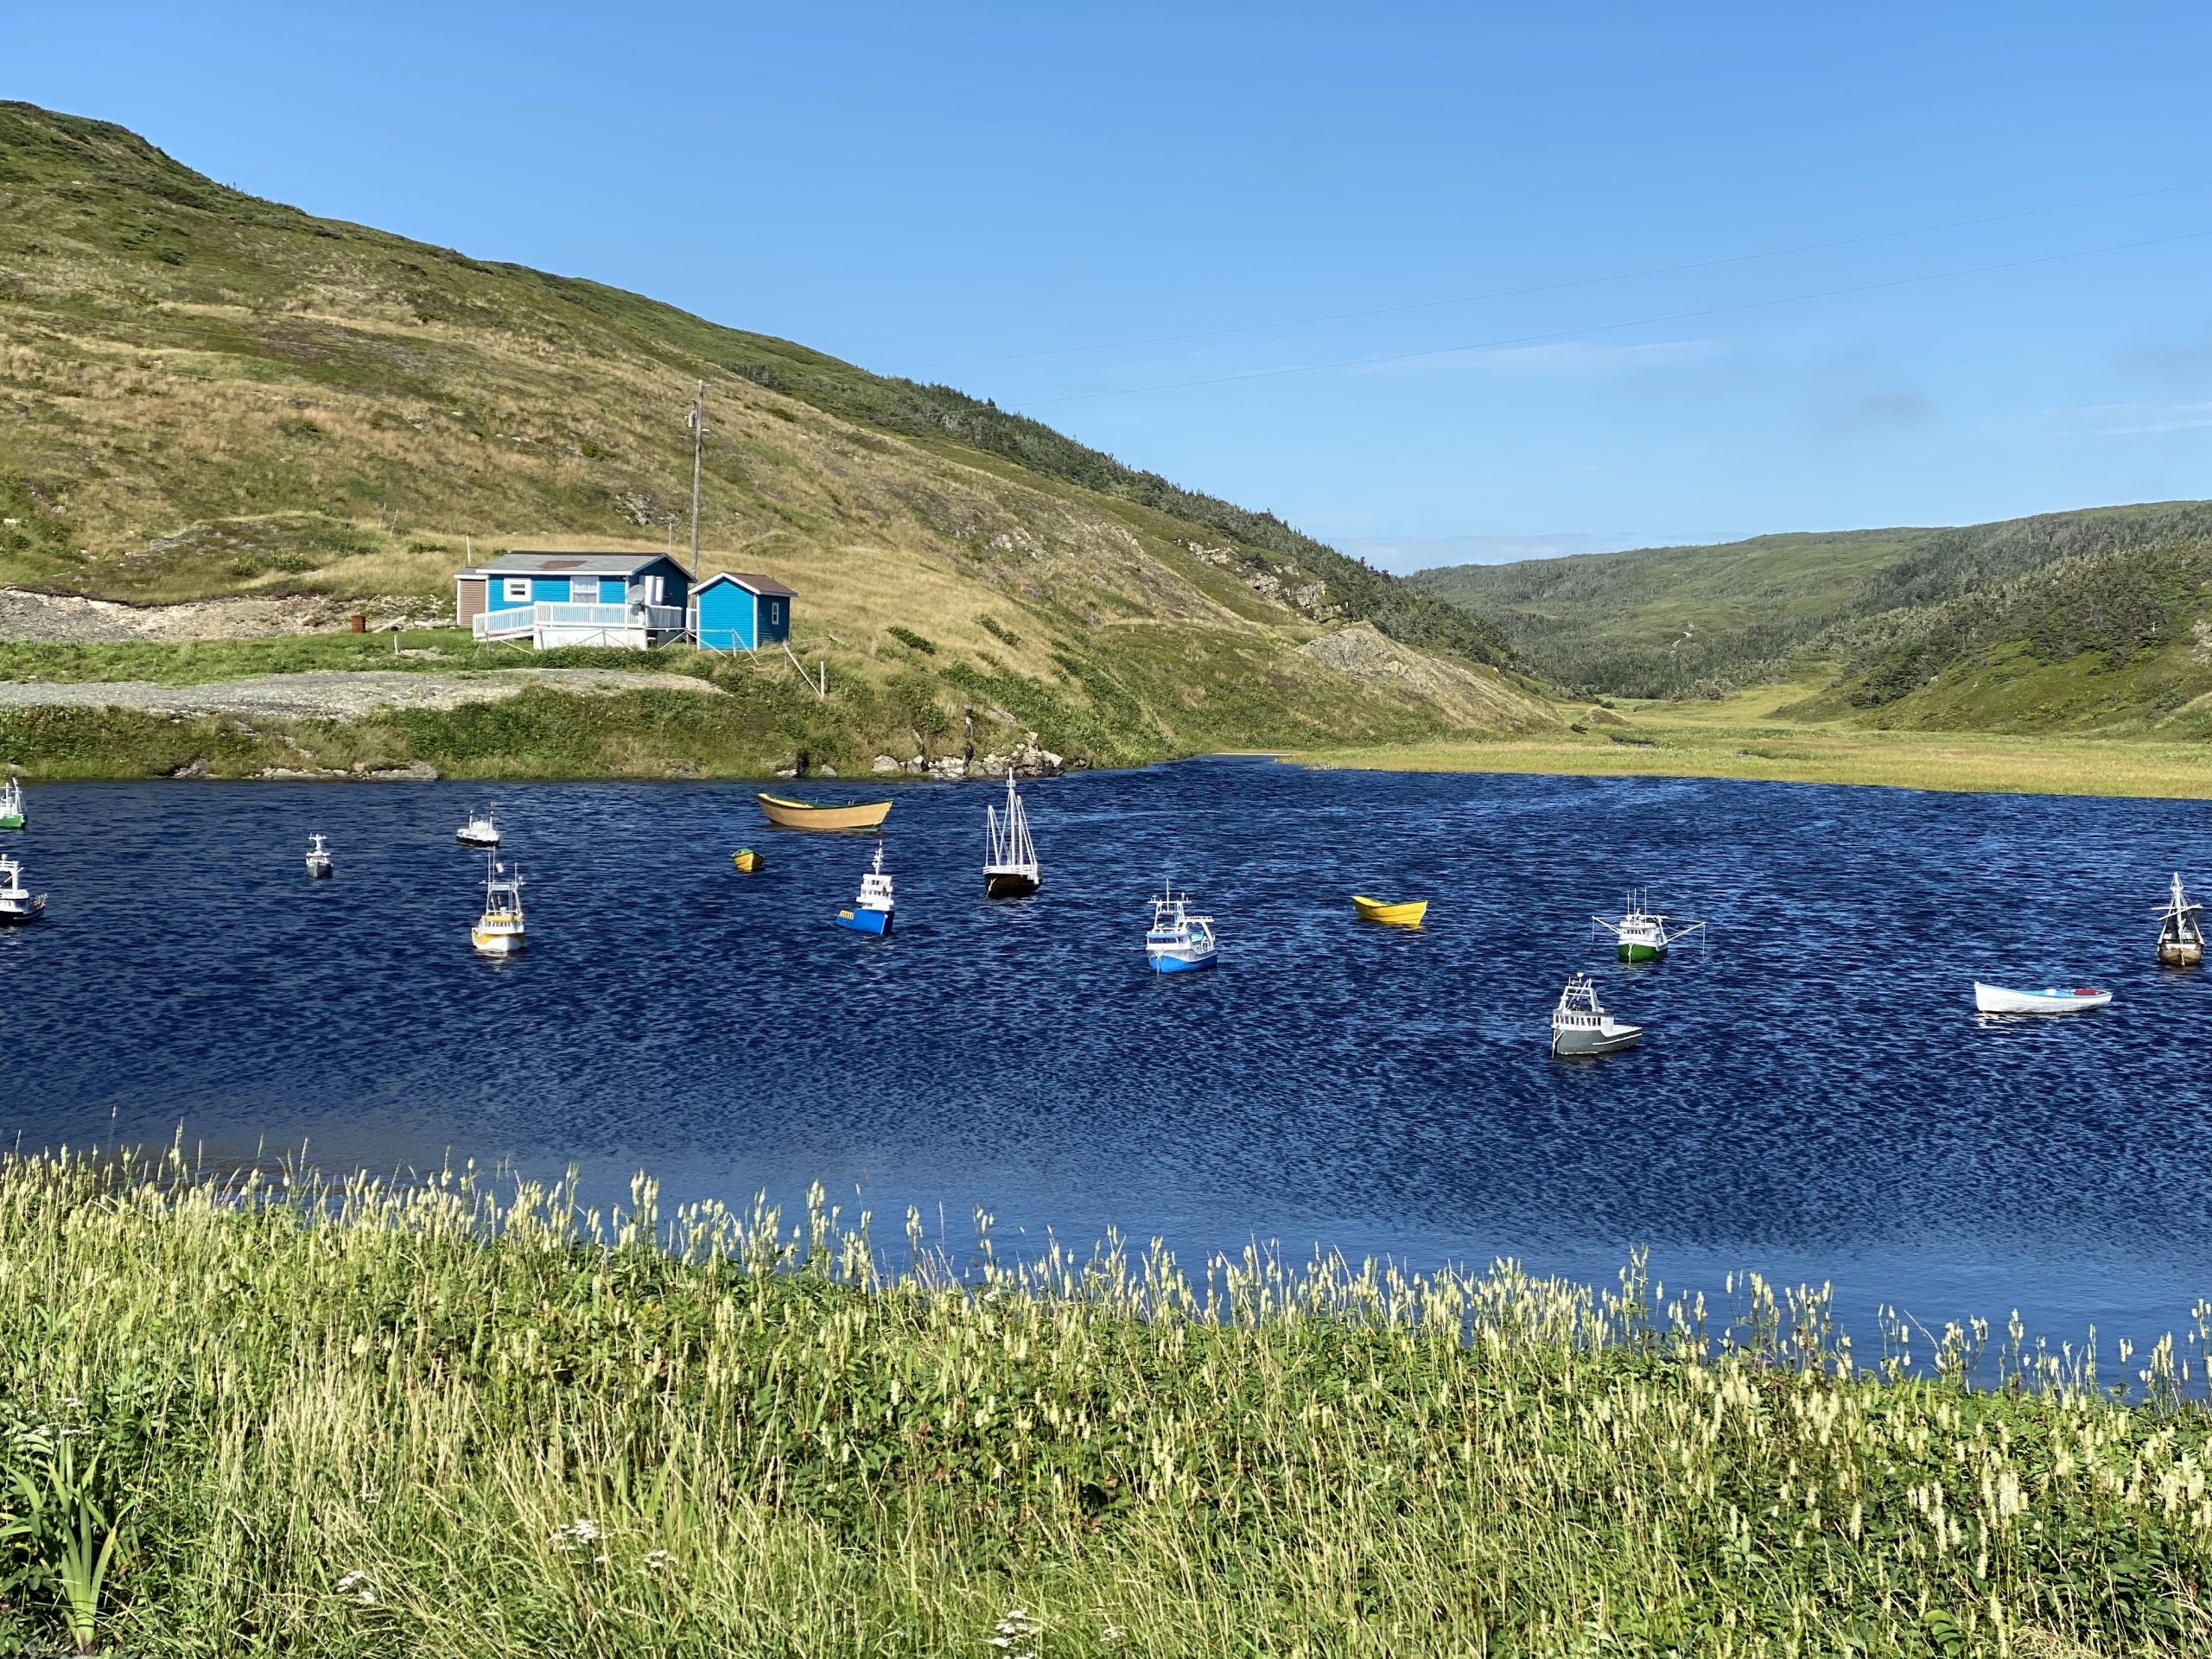 A local dude must have the hobby of building model boats and anchoring them in the pond next to his house; along the south coast of the Avalon Peninsula in Newfoundland.